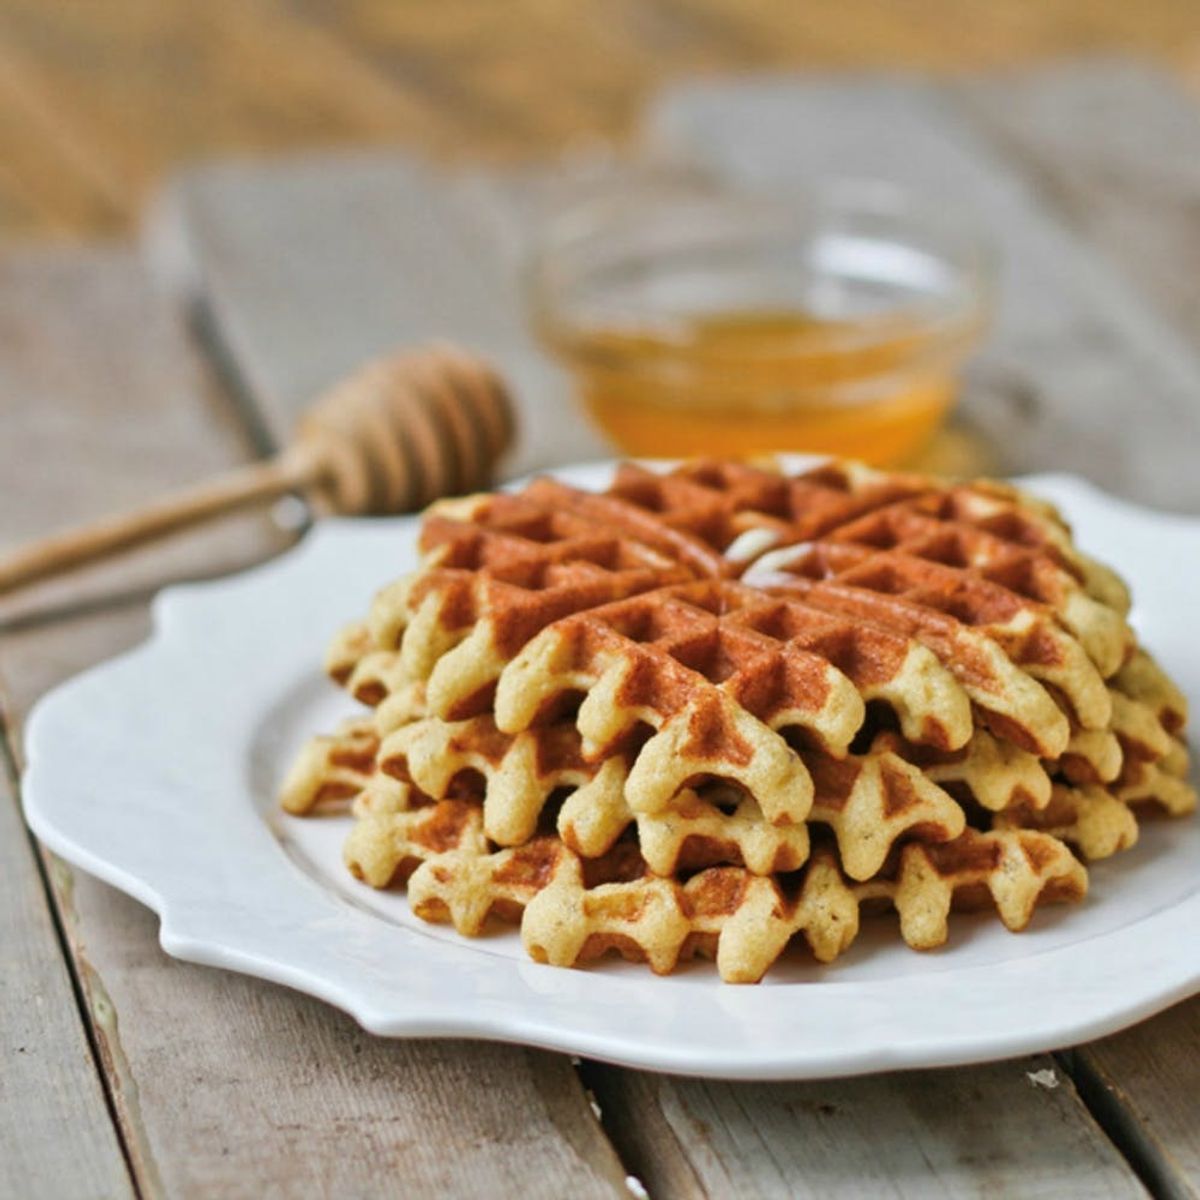 Waffles — They’re Not Just for Breakfast Anymore